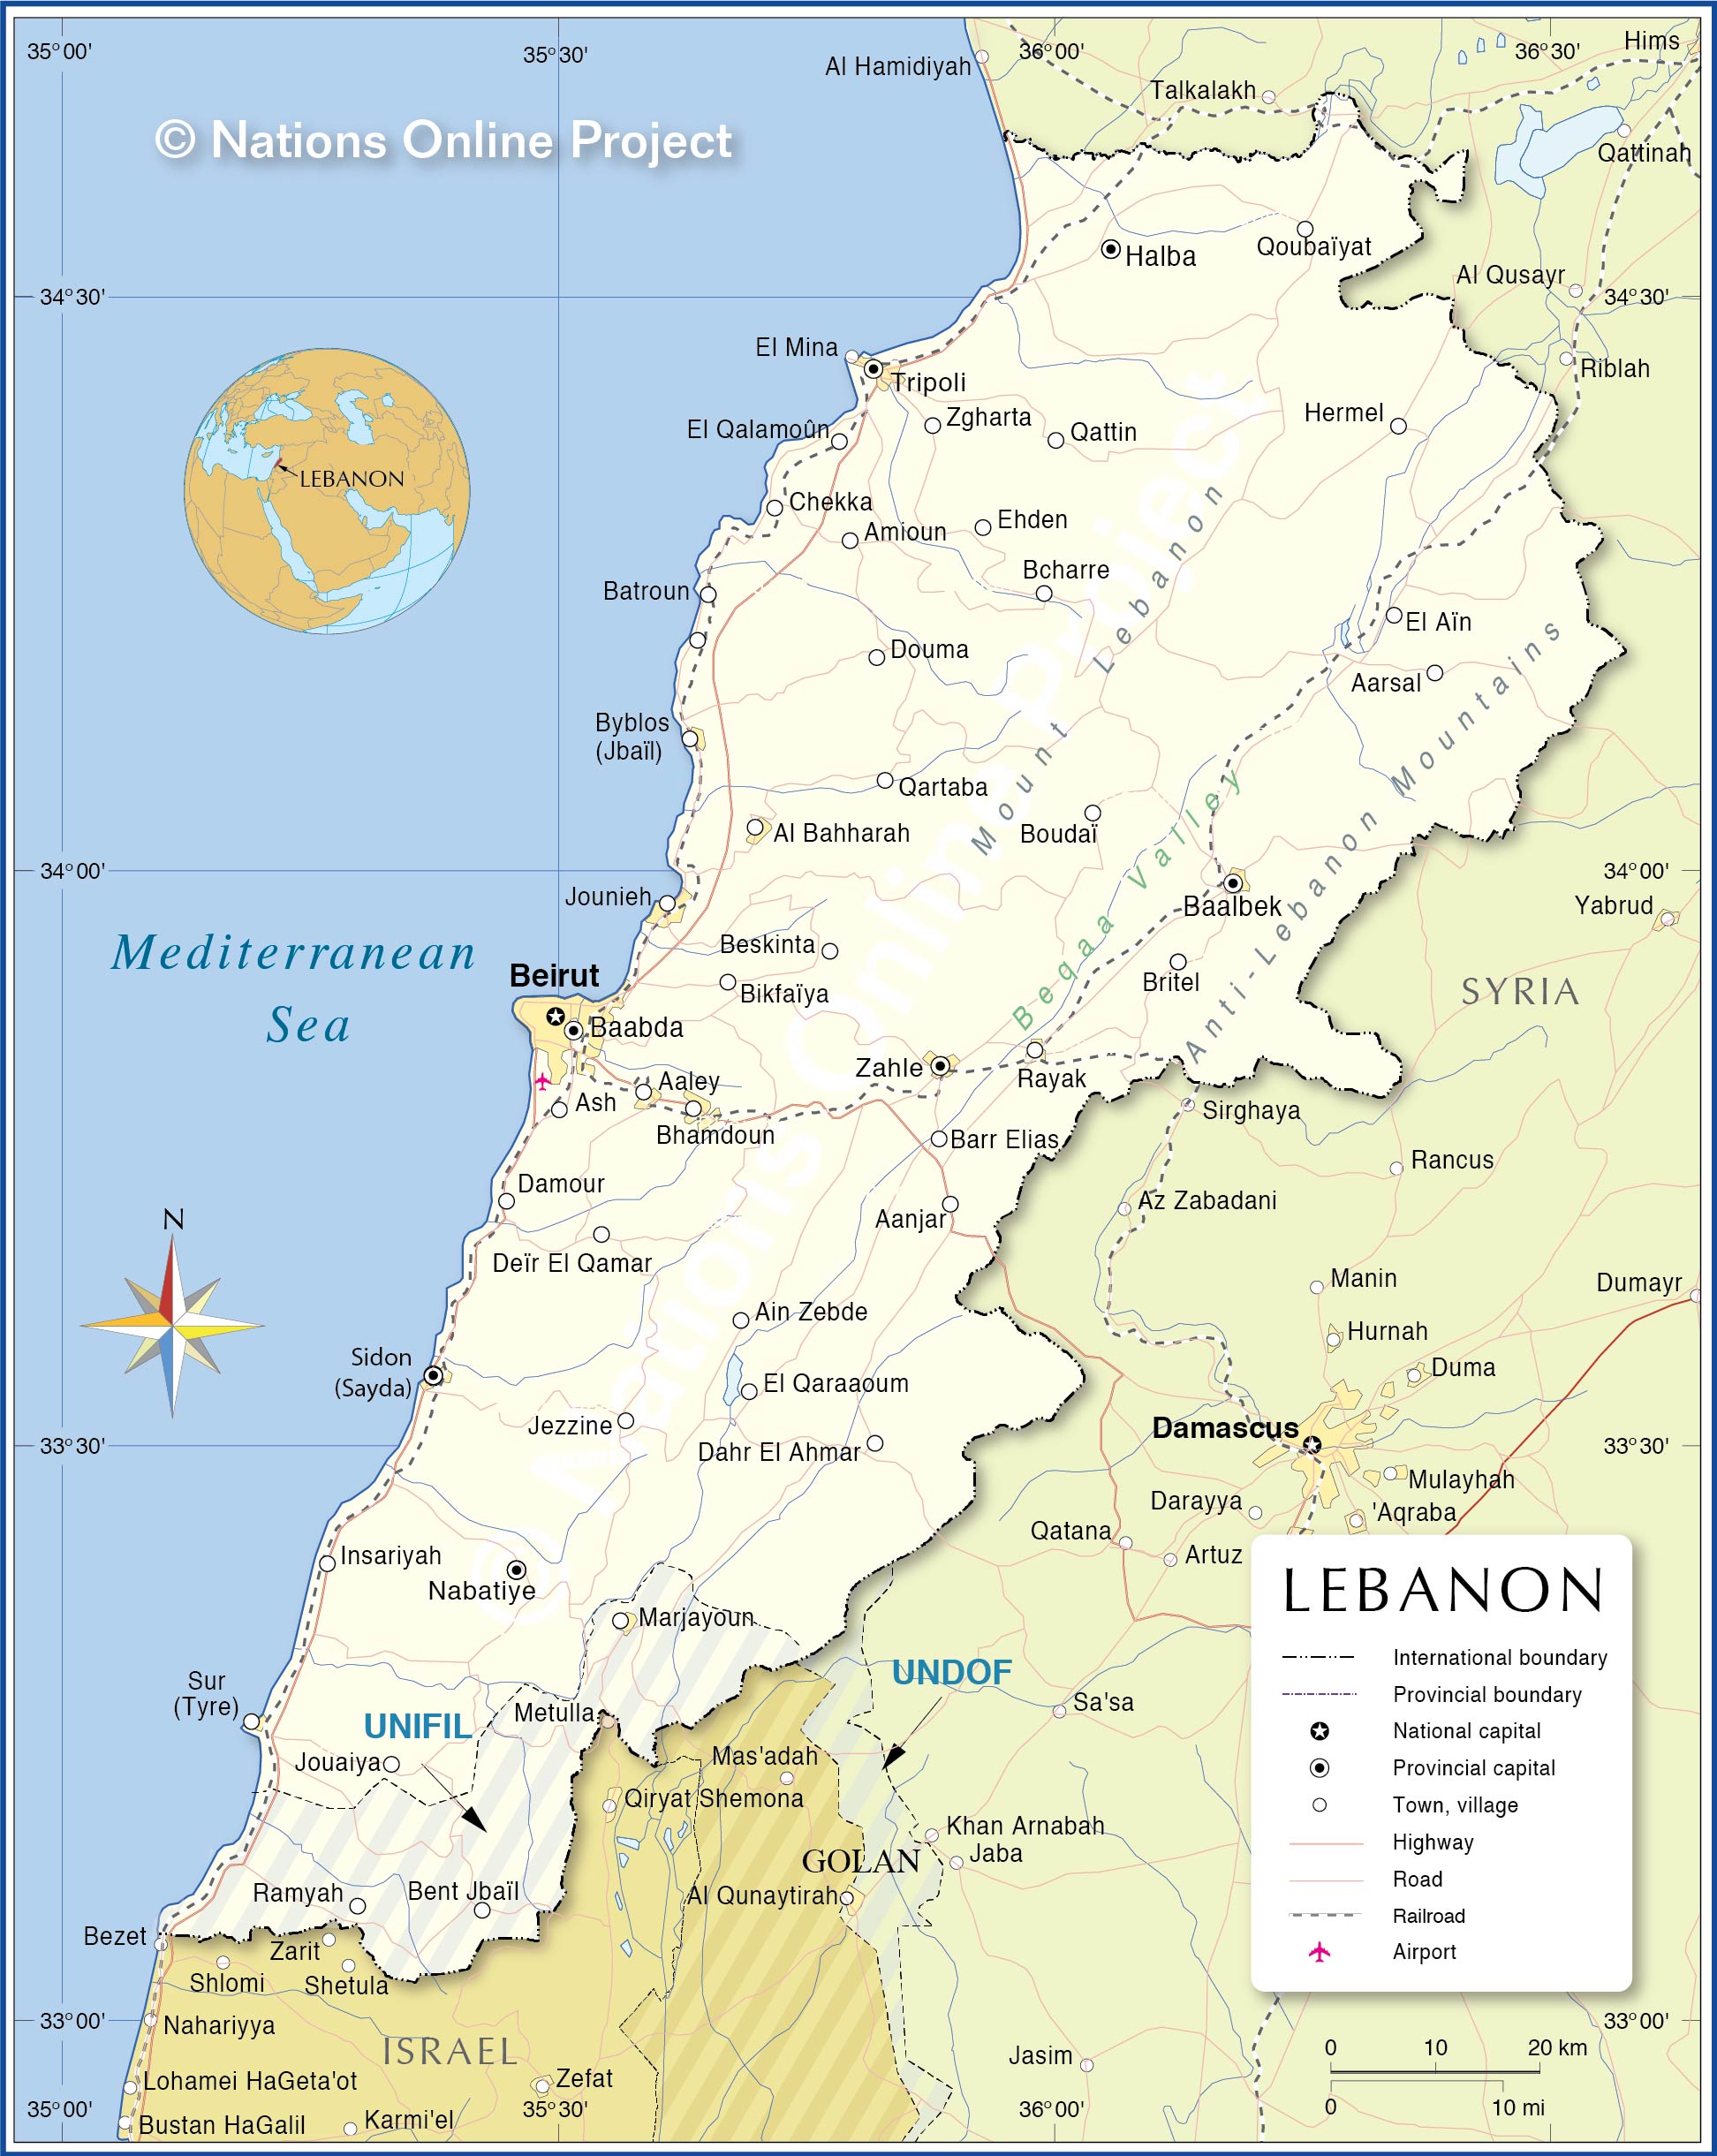 Show Me A Map Of Lebanon Political Map of Lebanon   Nations Online Project